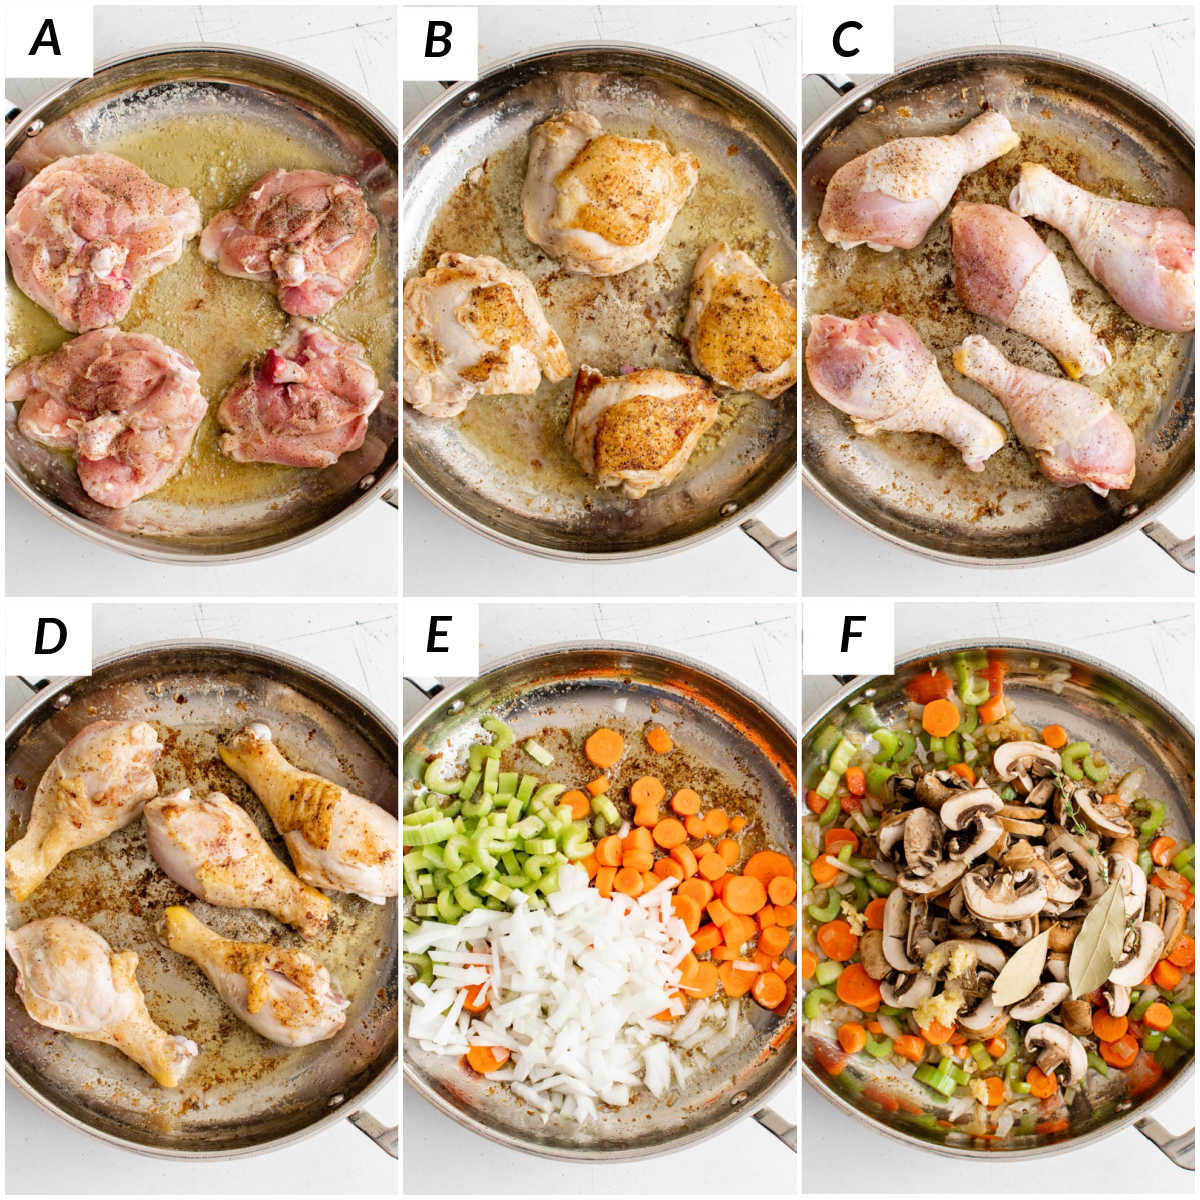 image collage showing the steps for making chicken fricassee